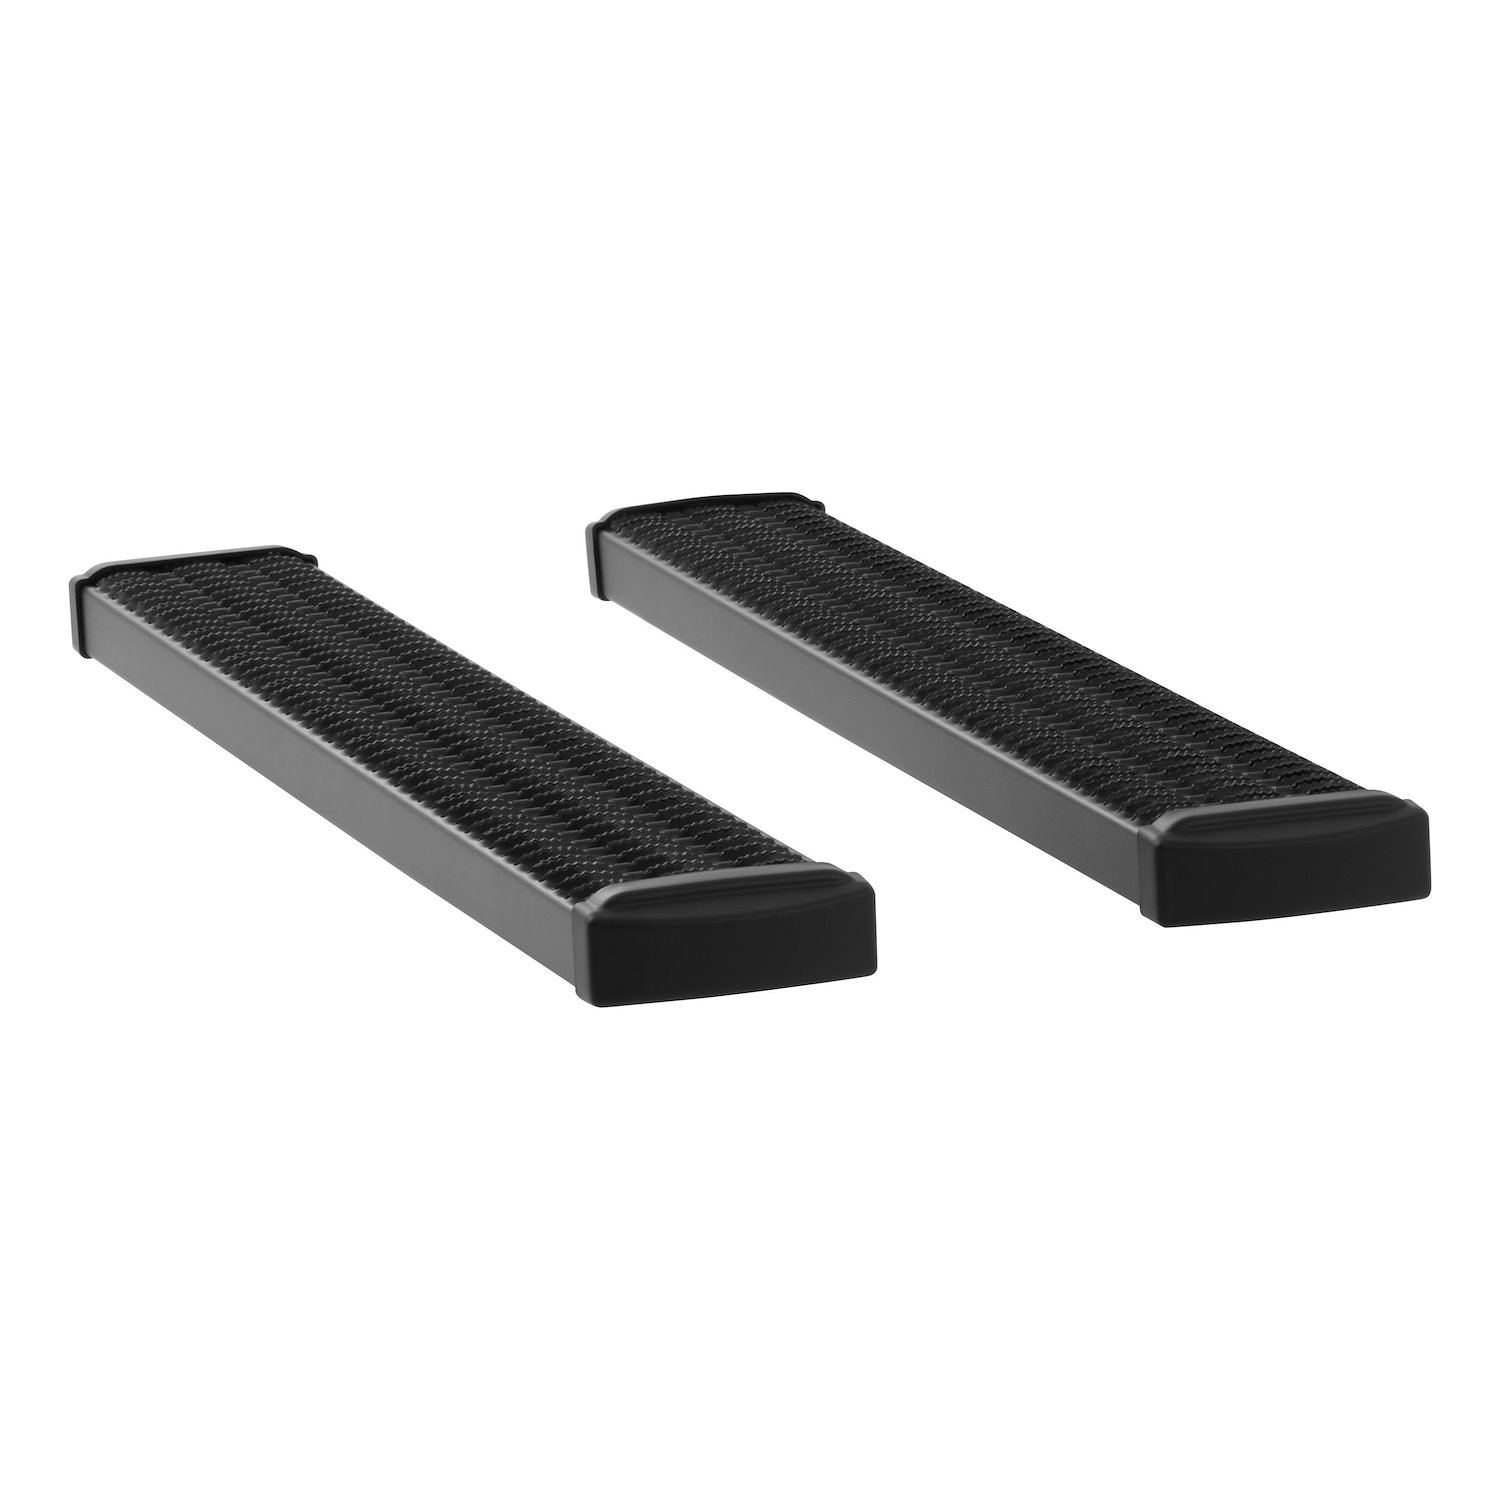 415054-401446 Grip Step 7 in. x 54 in. Black Aluminum Running Boards Fits Select Chevy Silverado, GMC Sierra